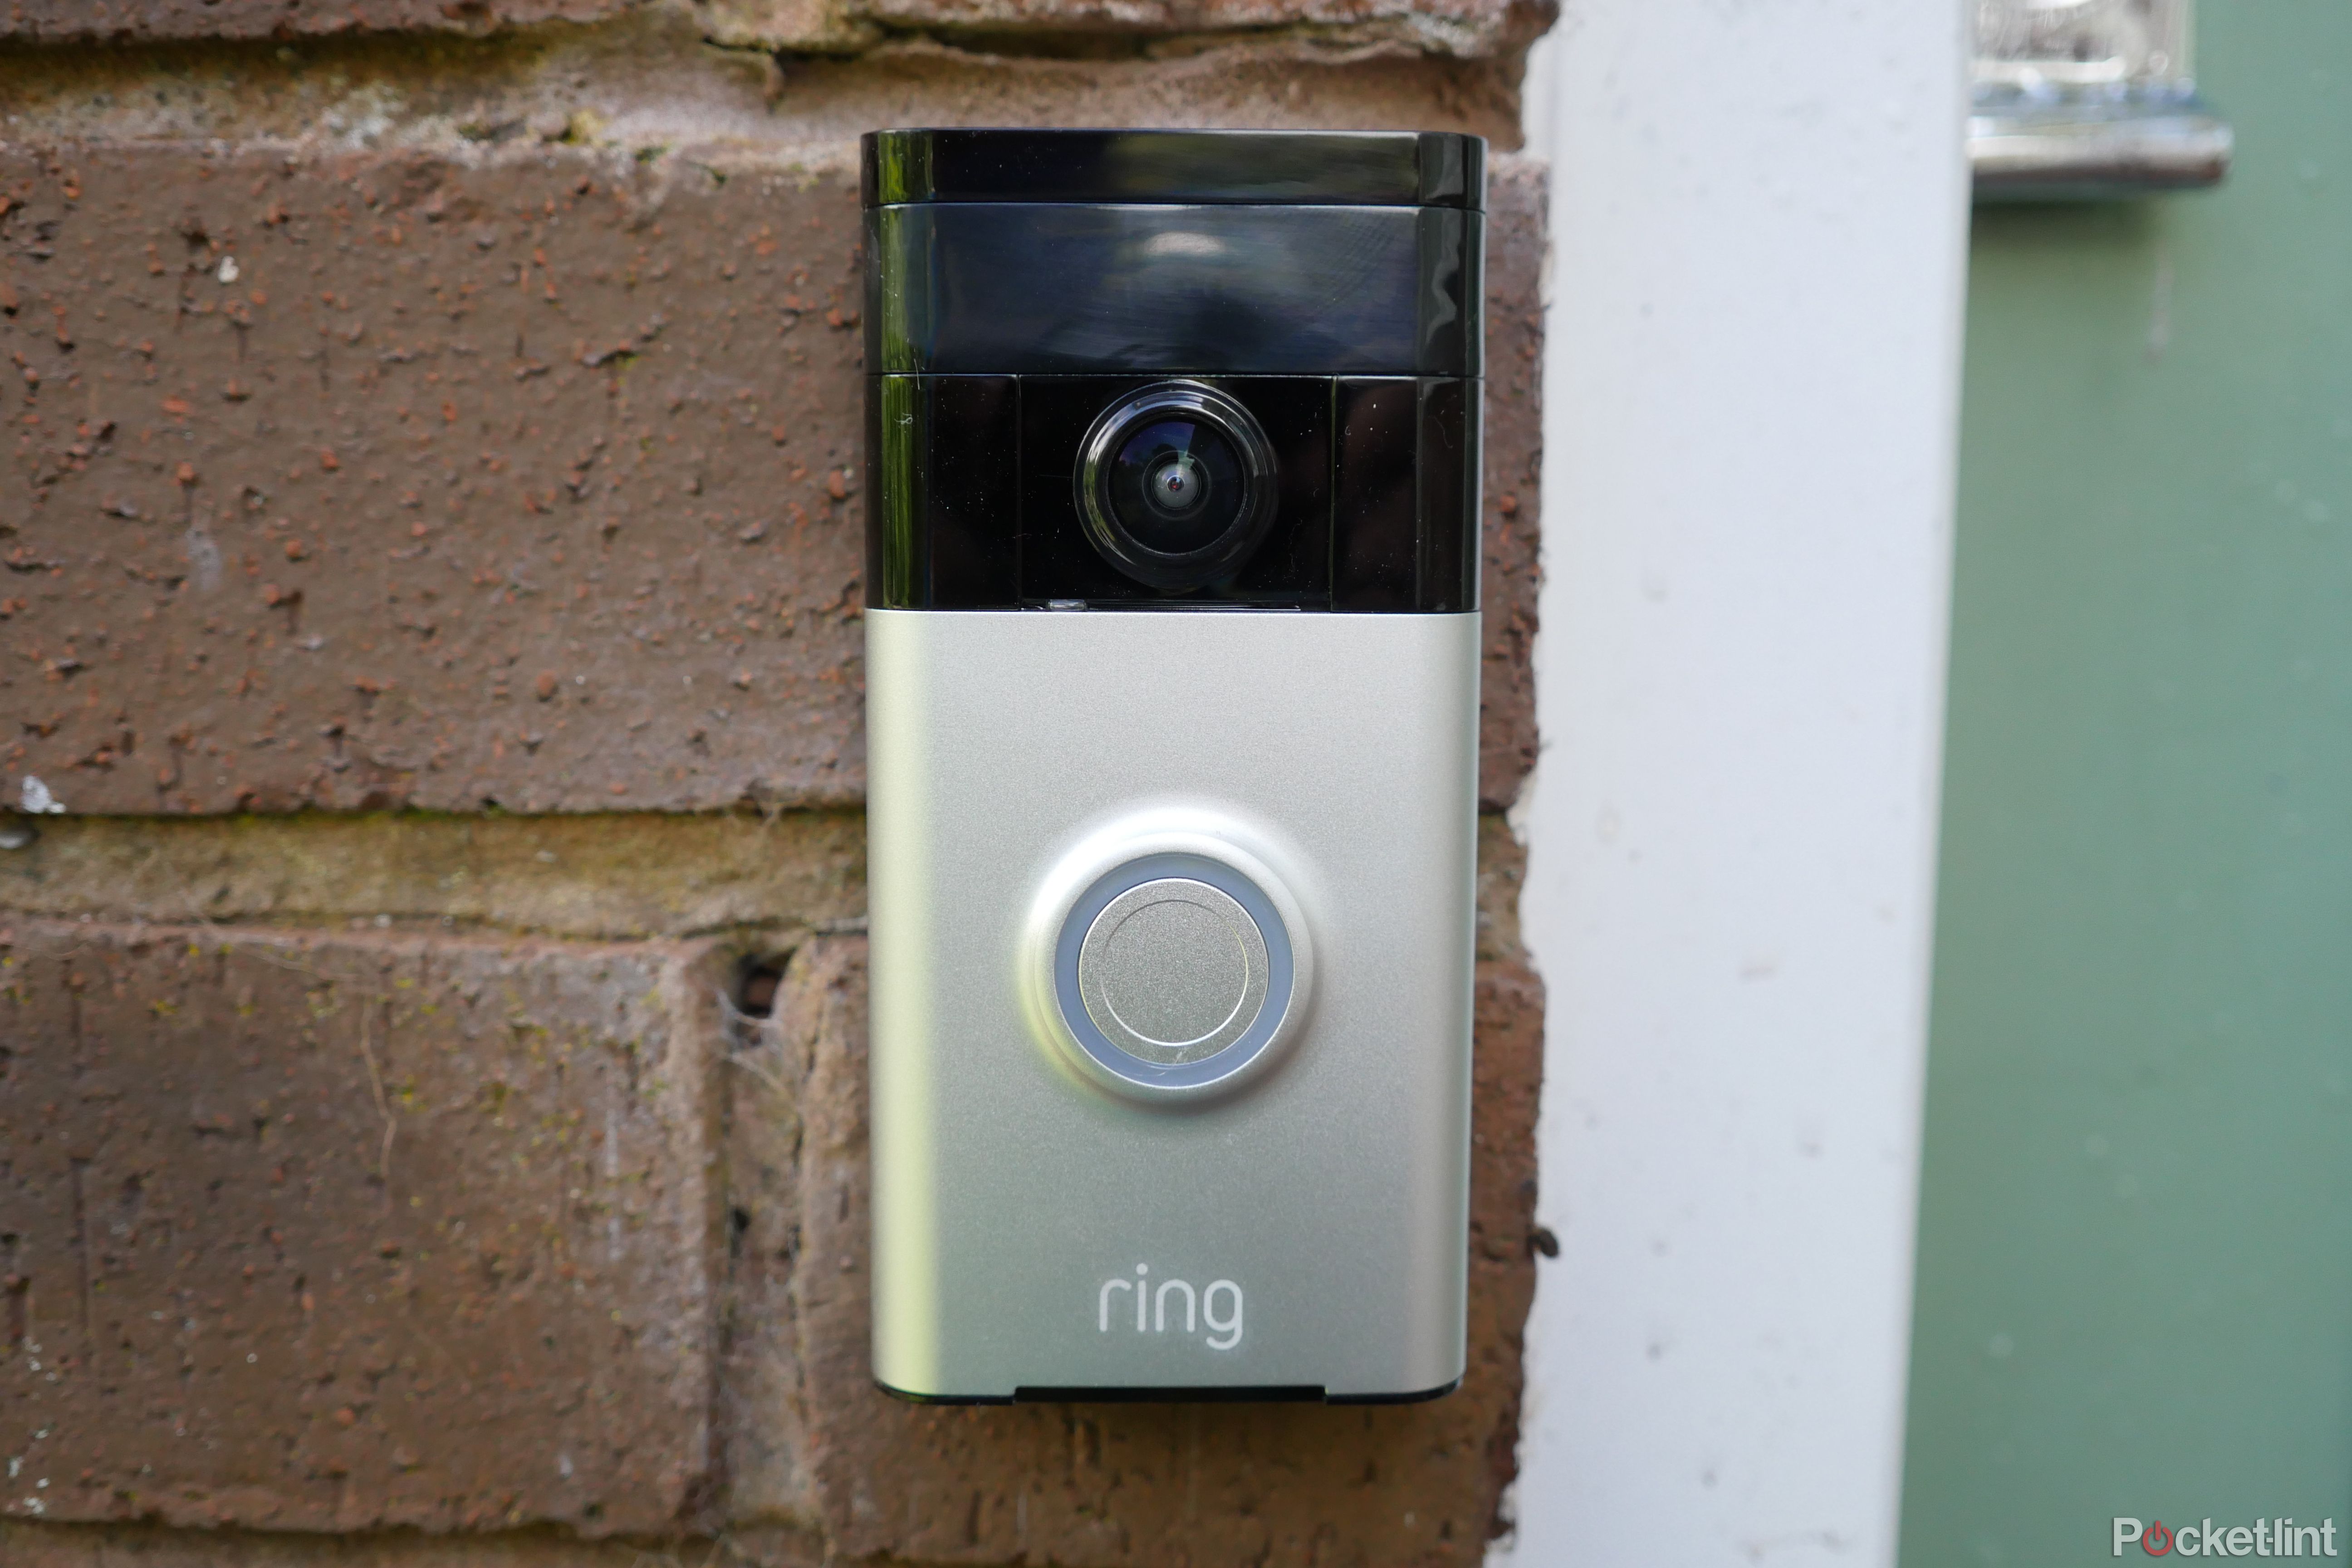 138503 smart home review ring video doorbell review image2 5gmejqcknh